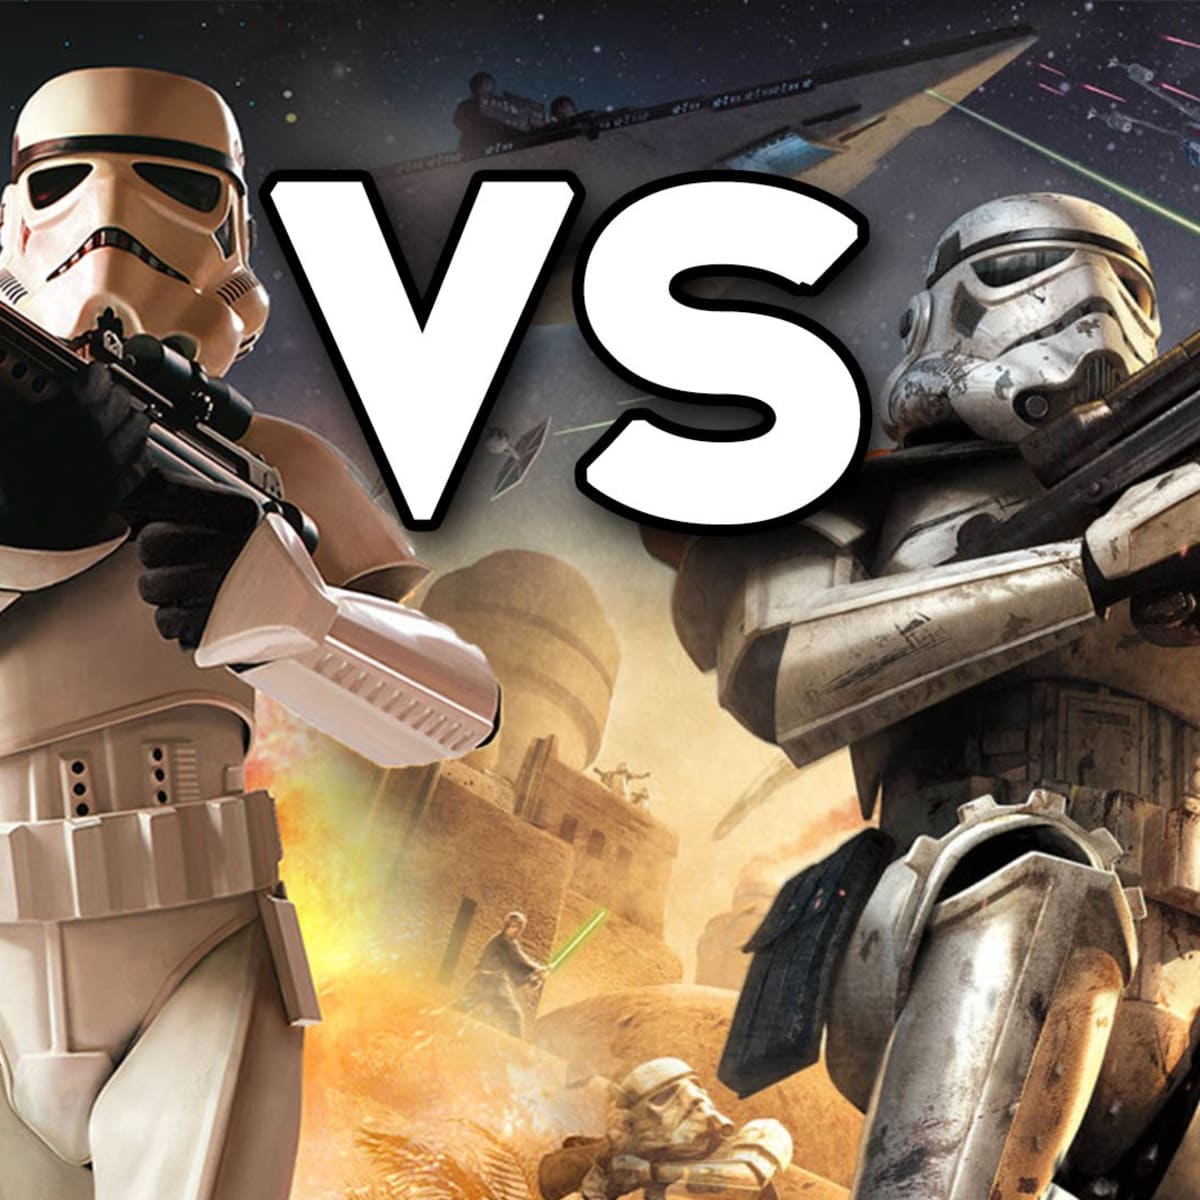 Why Frd S Star Wars Battlefront 3 Series Is Better Than Dice S Reimagined Series Explained Hubpages